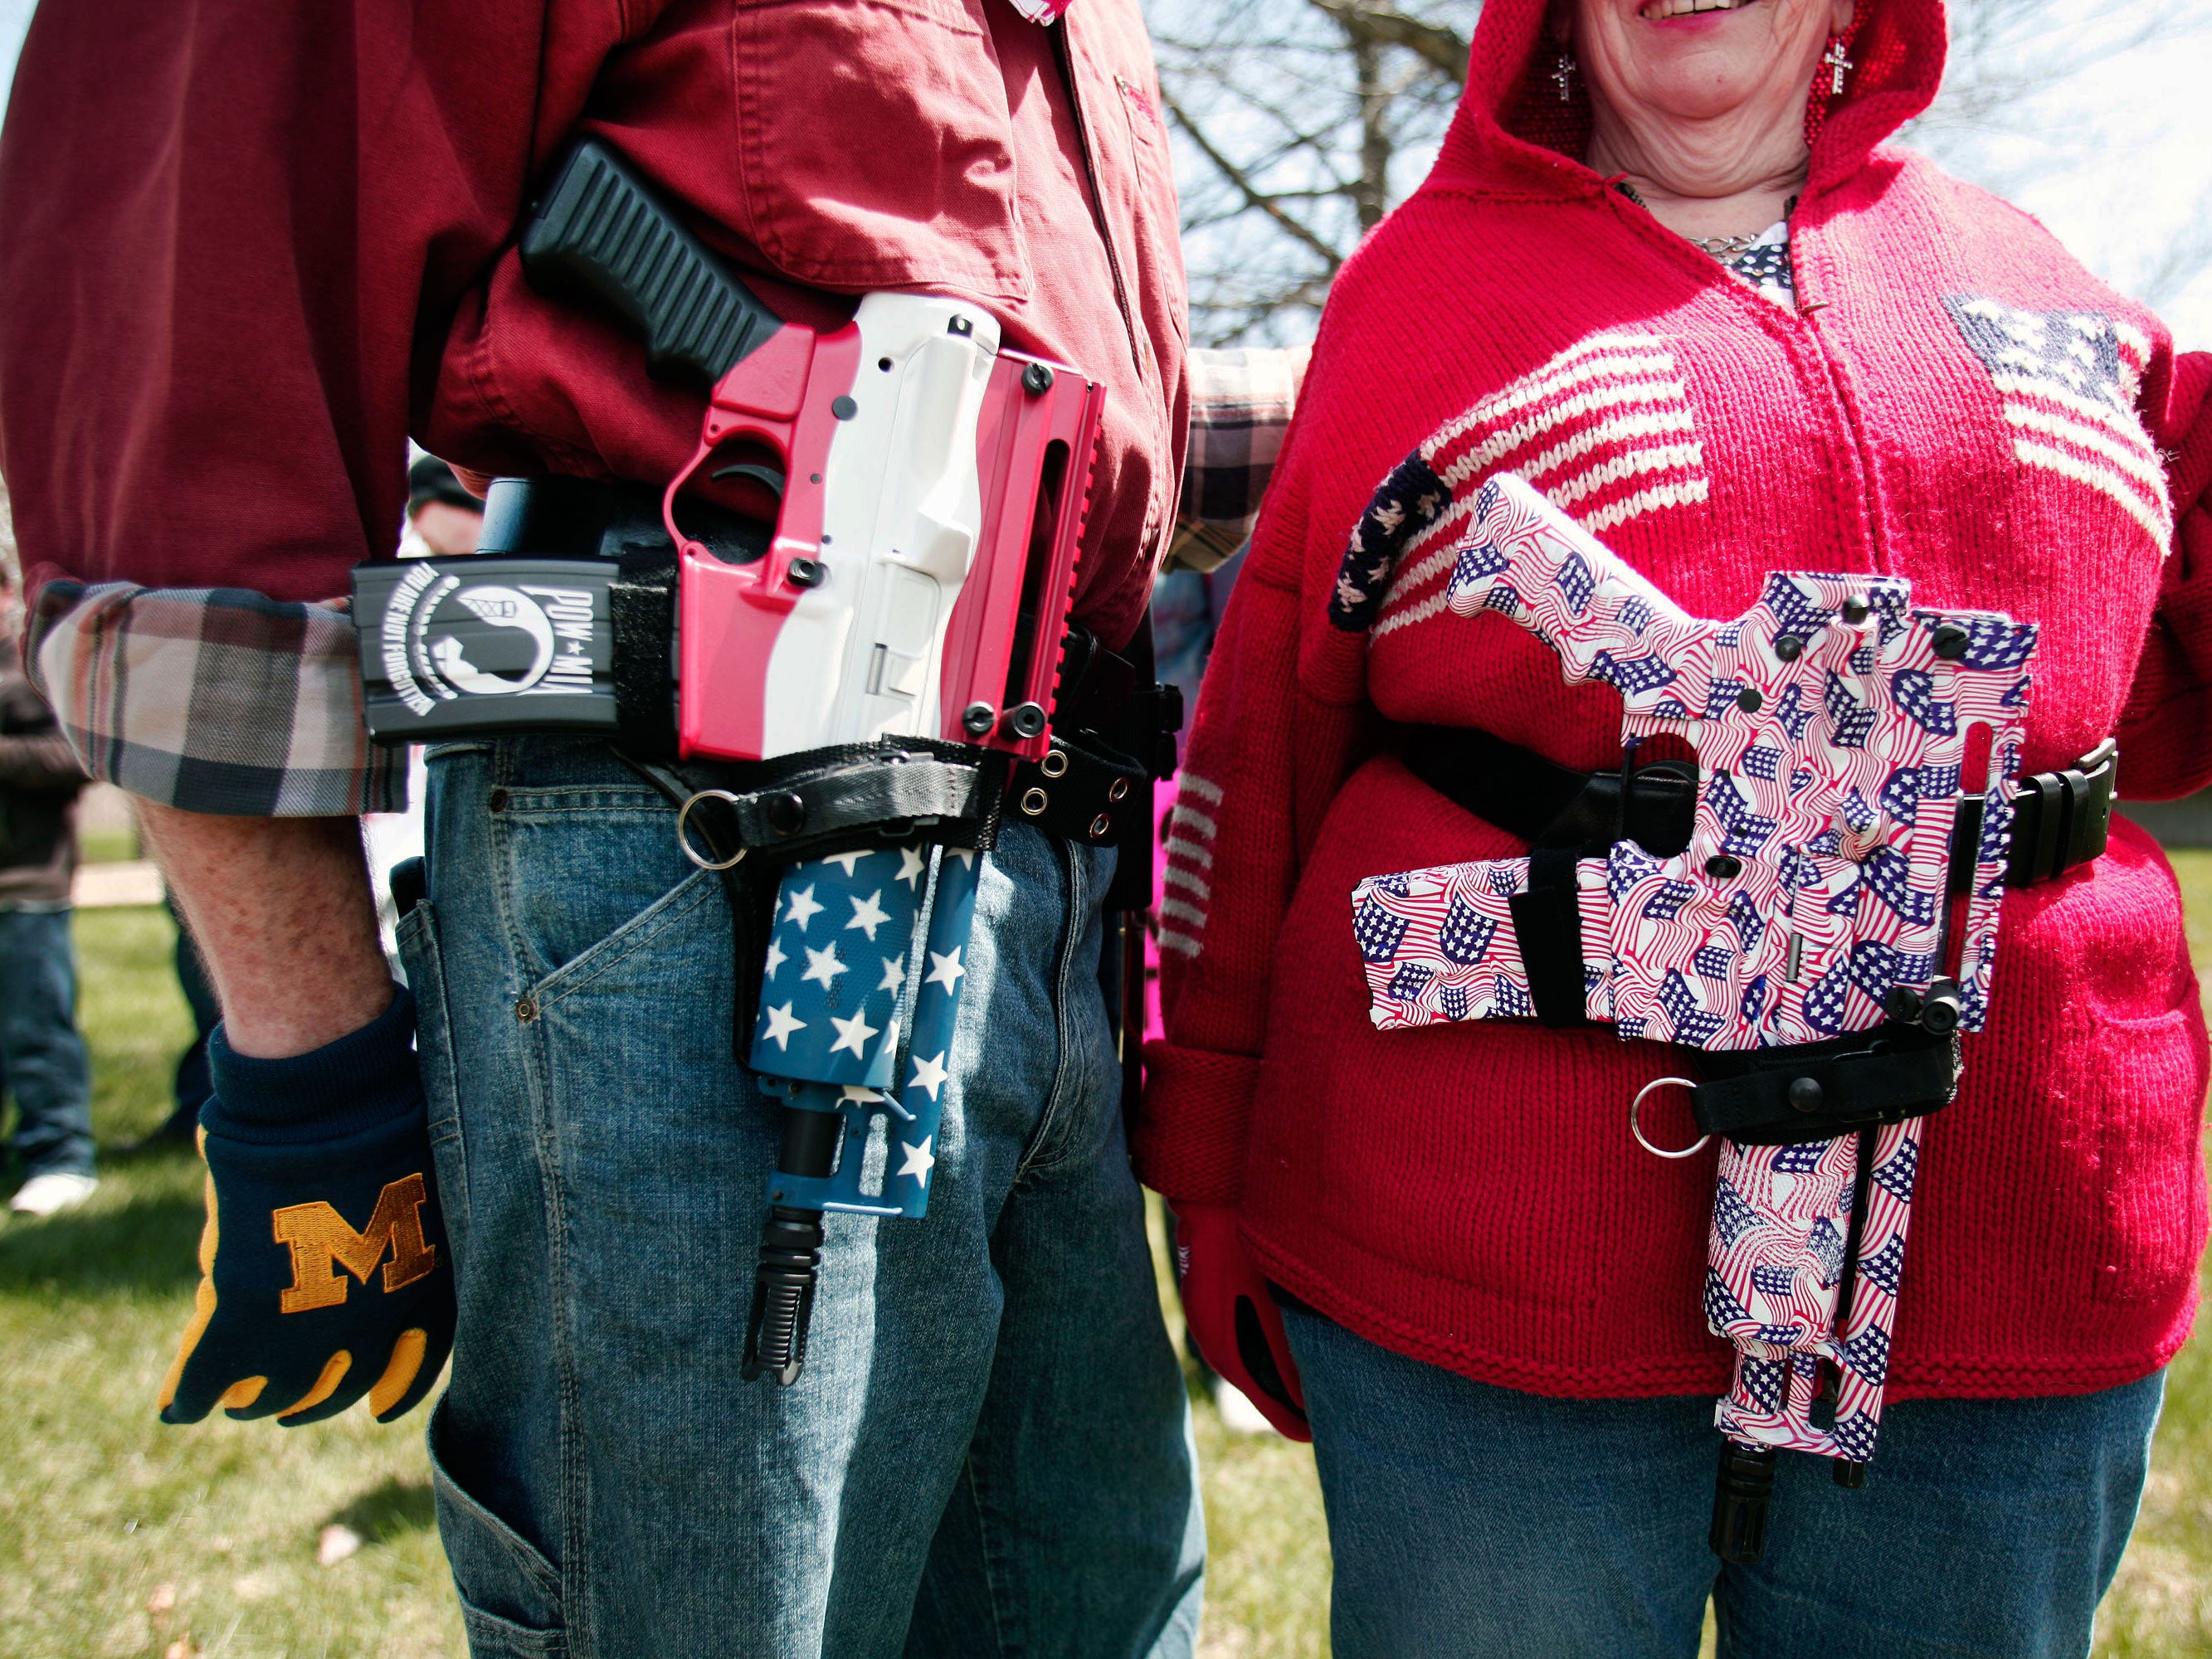 A couple show off their customised Olympic Arms OA93 pistols at a rally in Michigan for supporters of the right to openly carry guns in public.